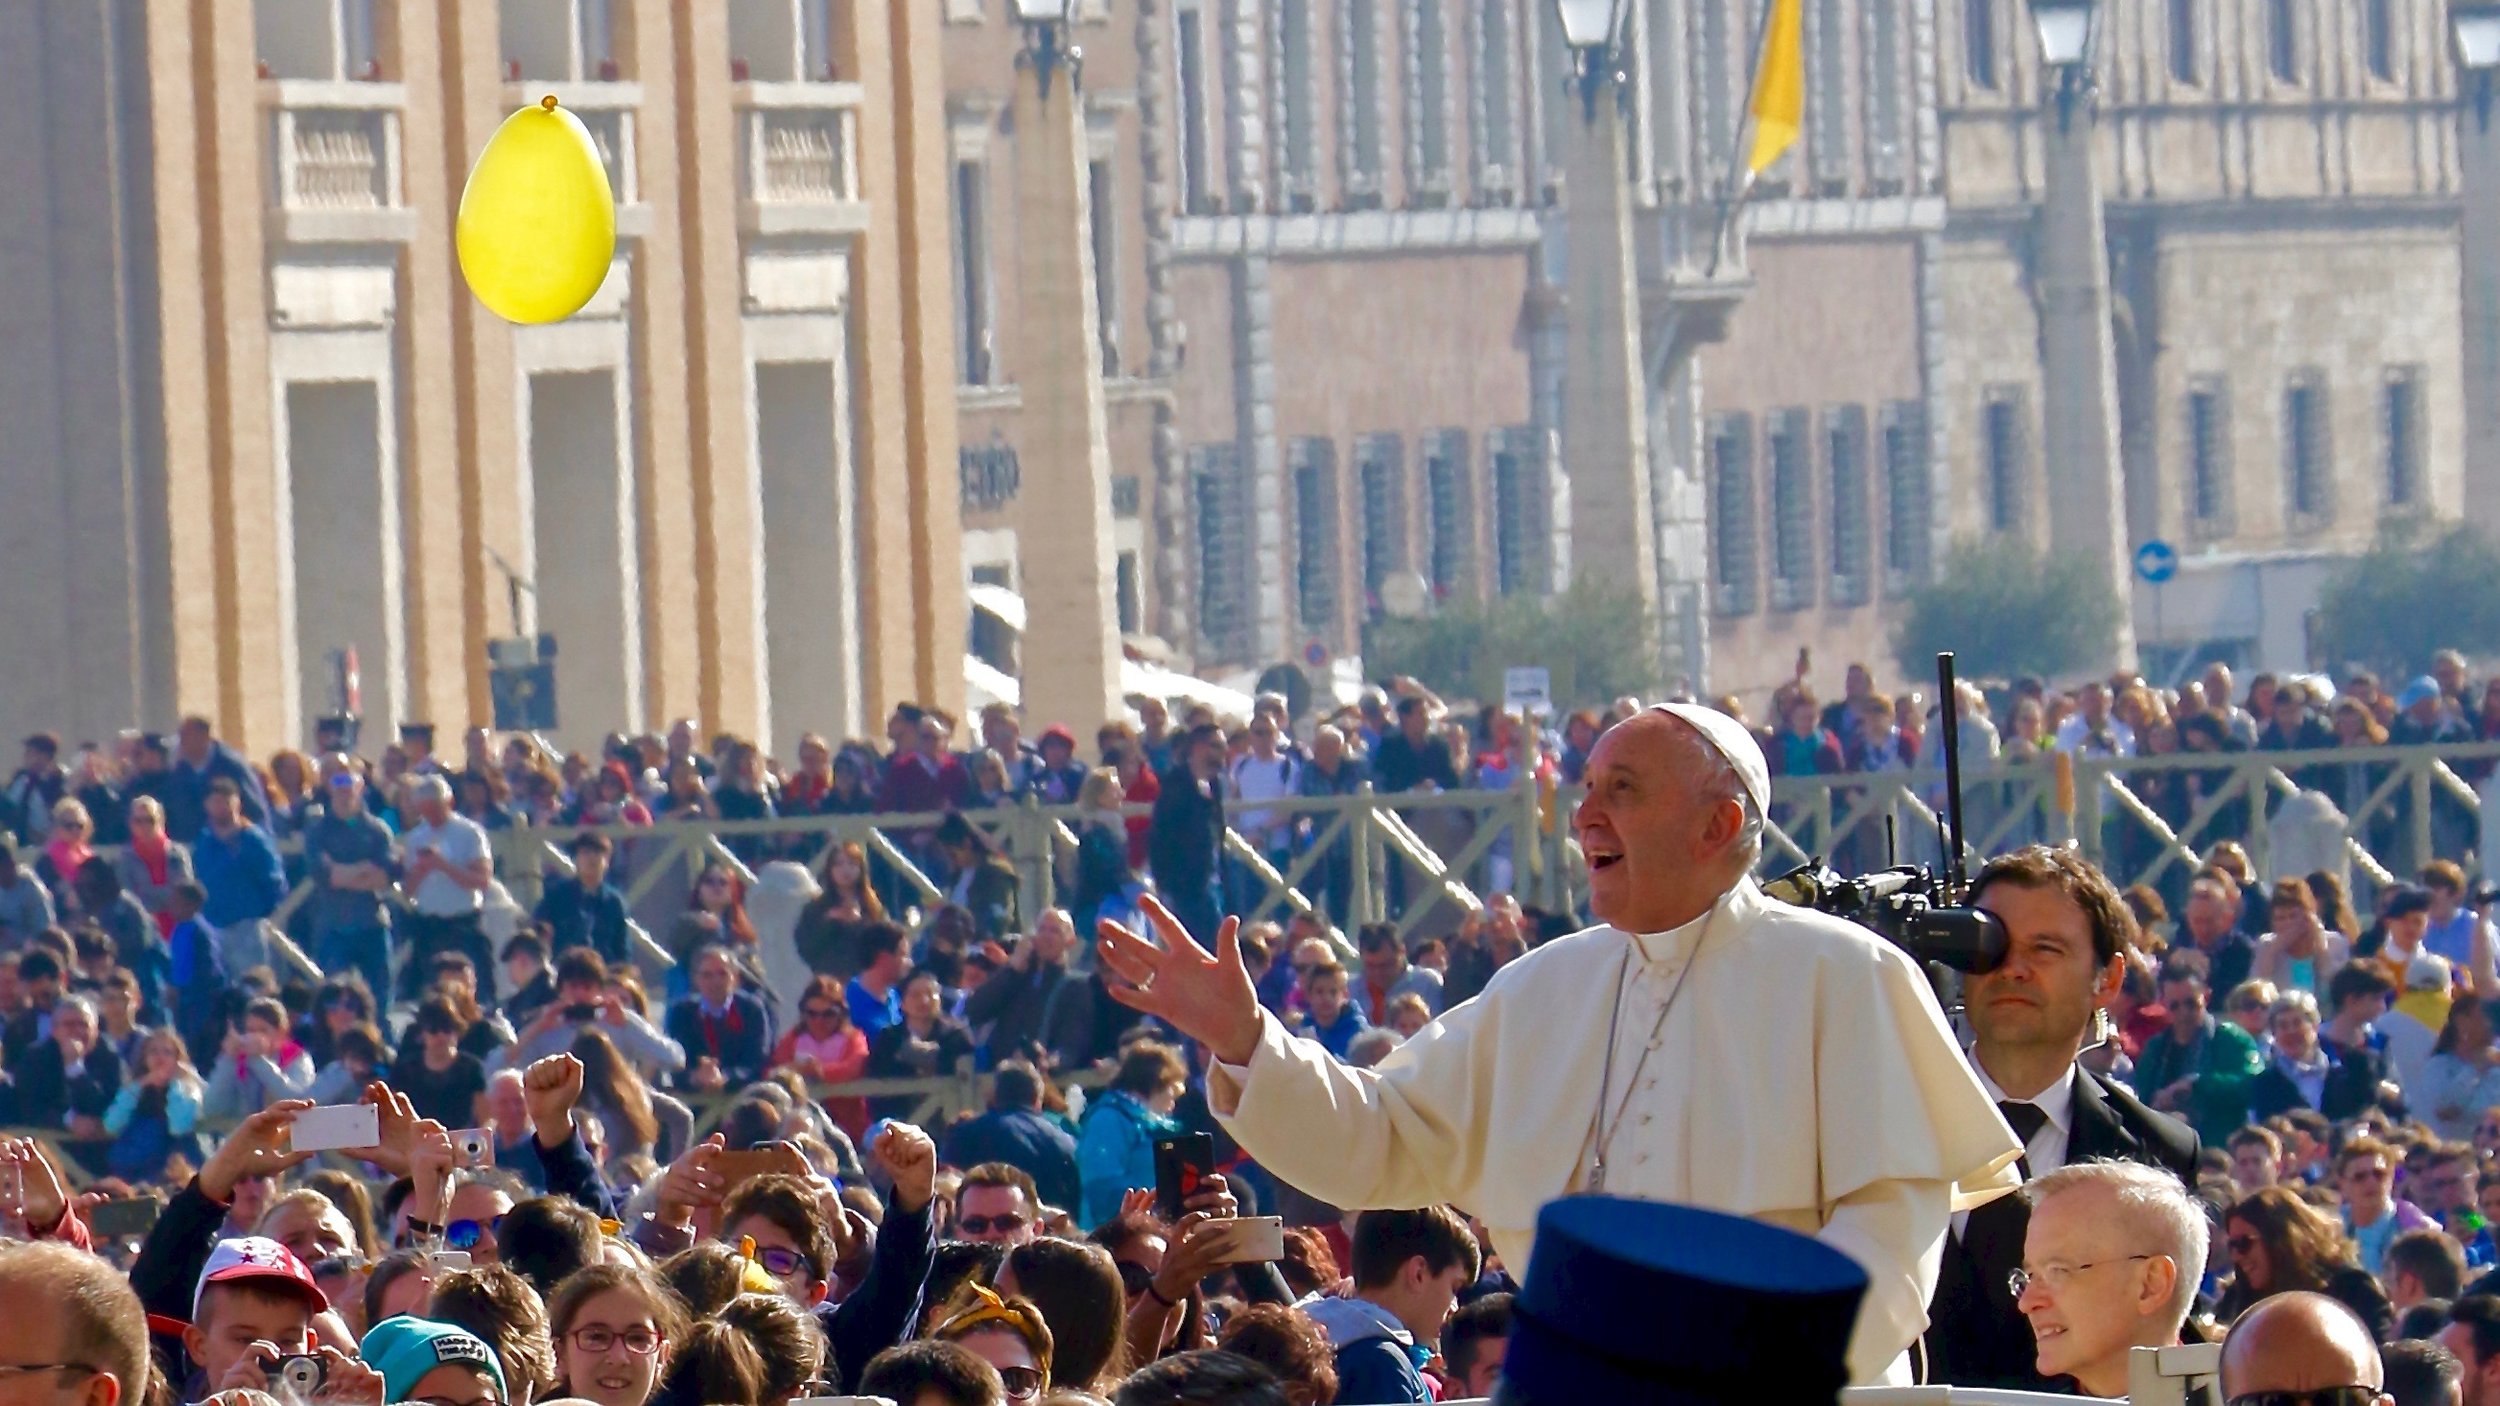 PAPAL AUDIENCE ON APRIL 19, 2017